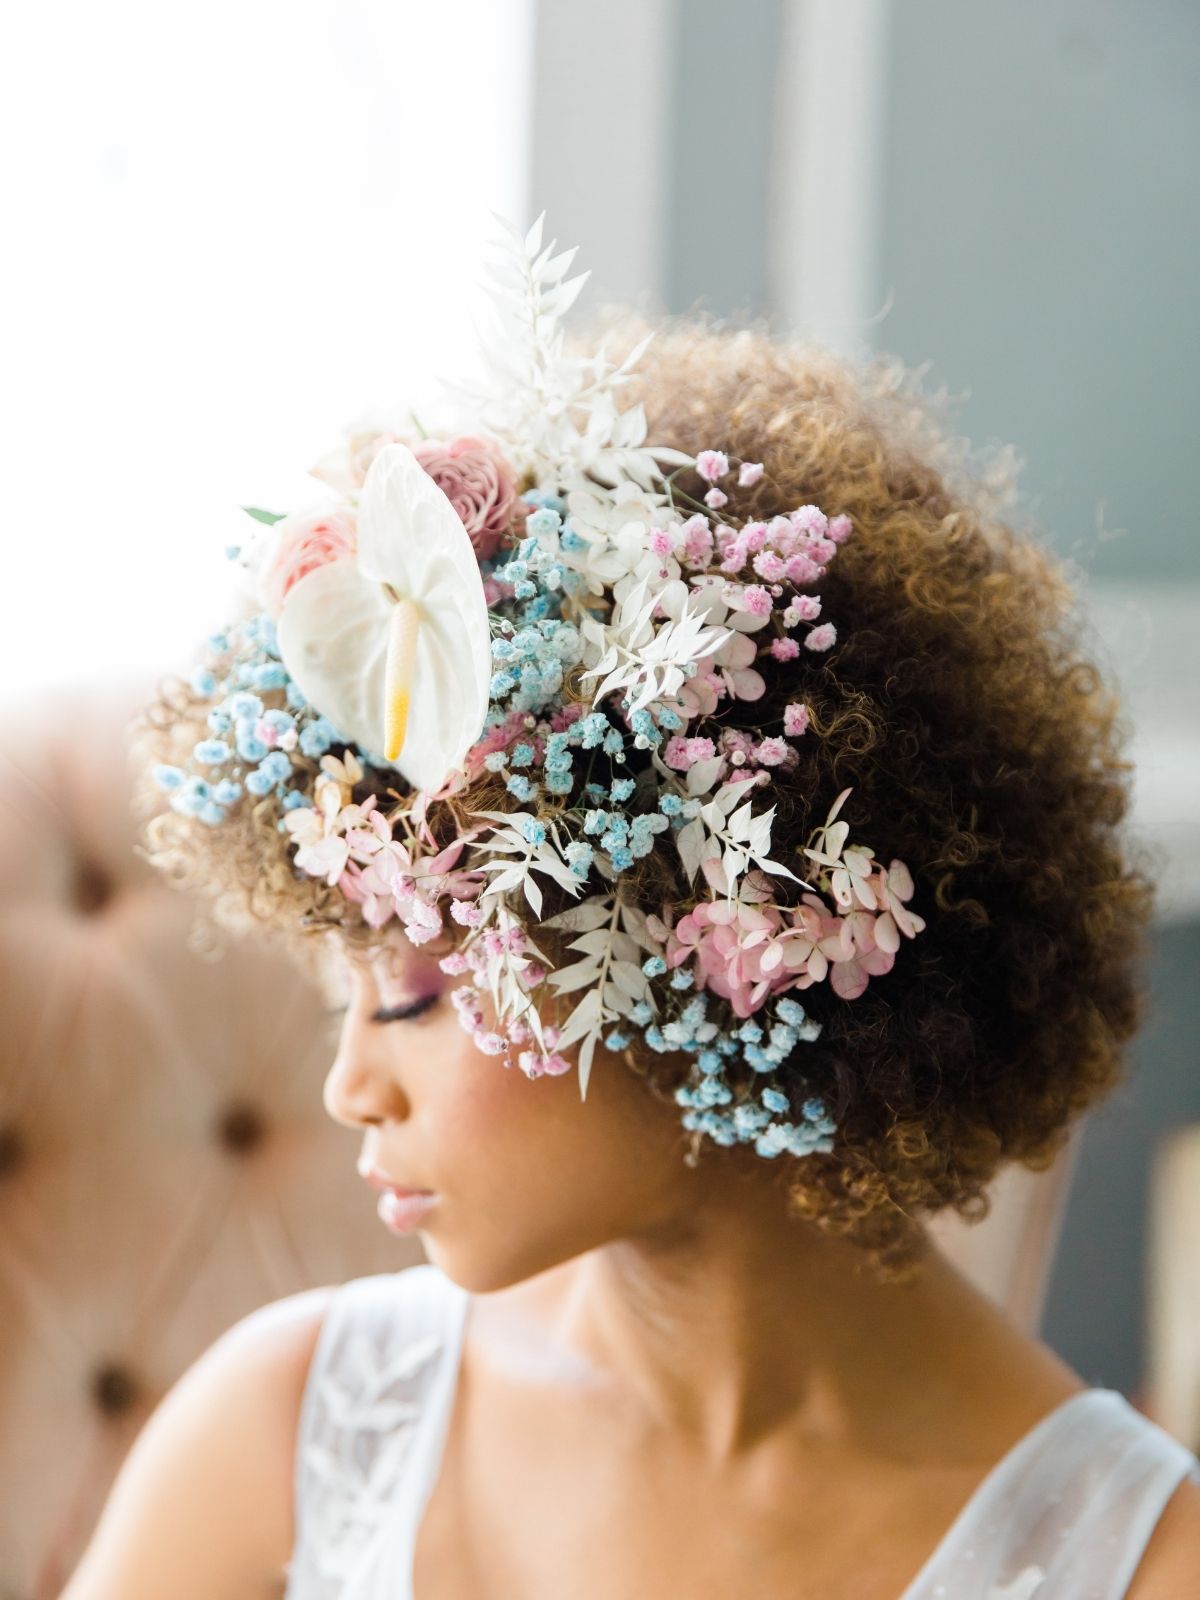 Erin McLarty - Eden's Echo - interview on Thursd - Monica Roberts Photography - colorful died flowers headpiece